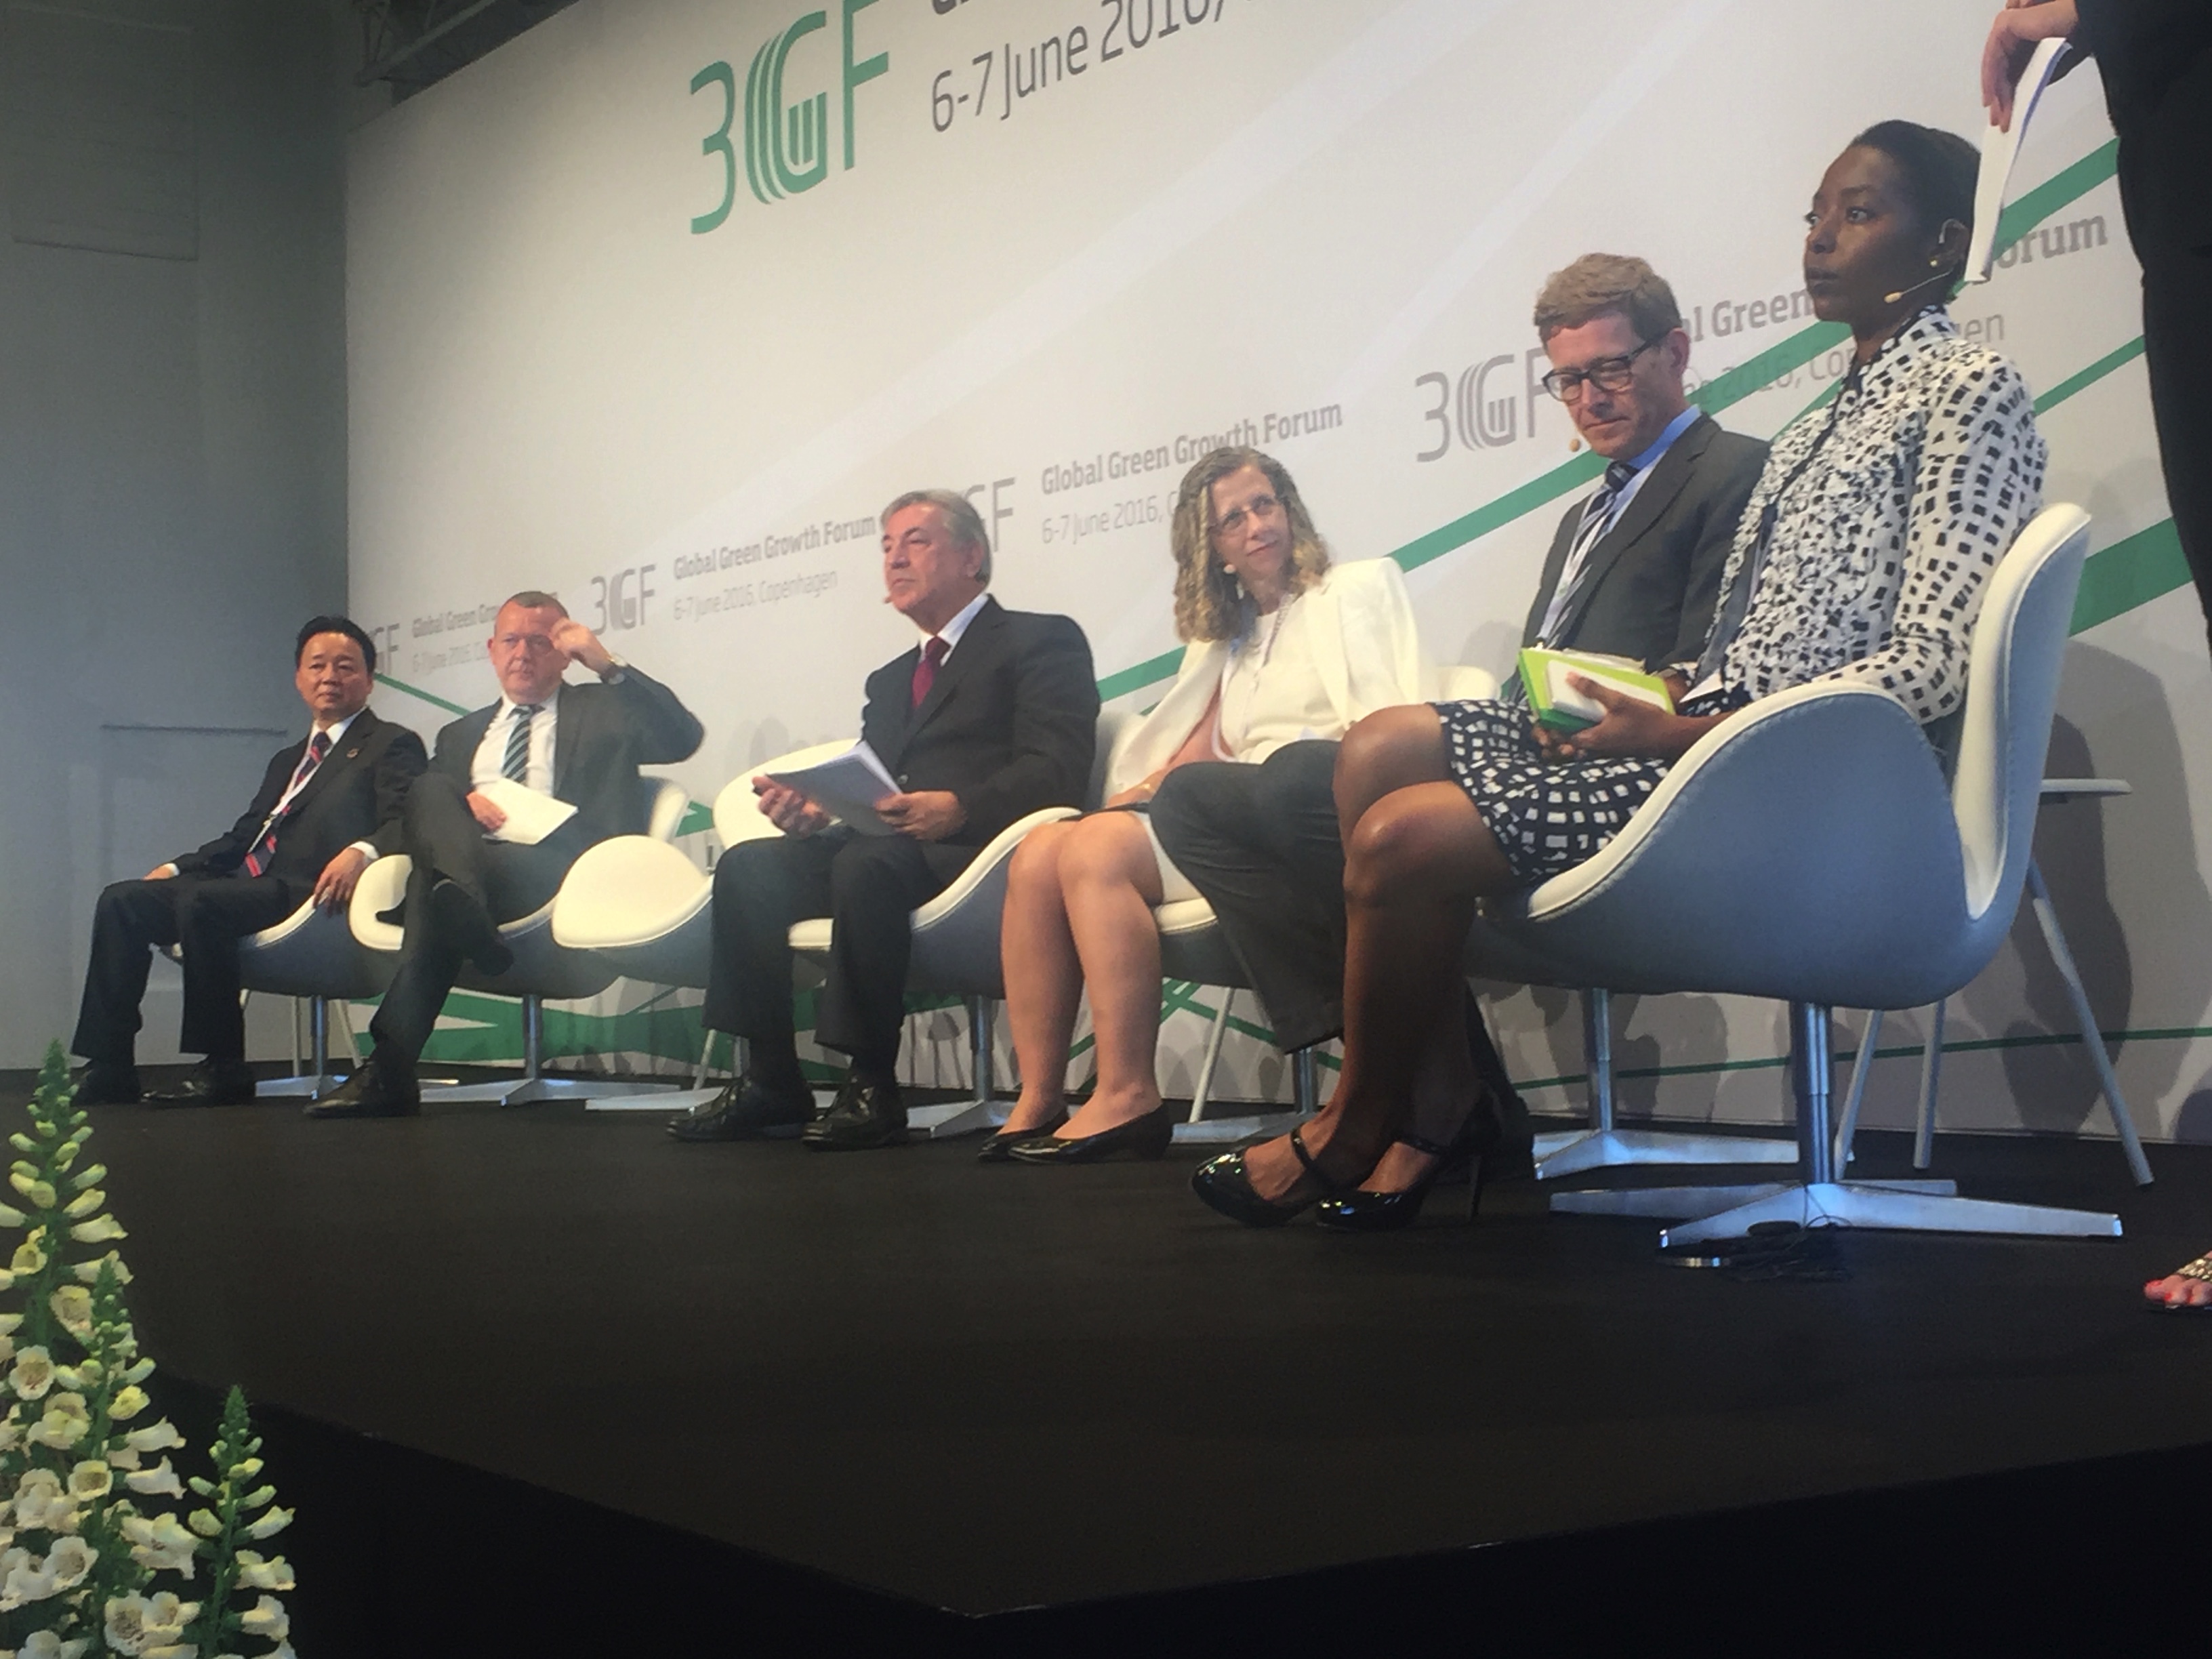 L-R: Prime Minister of Denmark, Lars Lokke Rasmussen; Minister for Natural Resources and Environment, Vietnam, Tran Hong Ha; Director-General of IUCN, Inger Andersen; CEO of Danfoss, Niels B. Christiansen; Panel moderator and Chair of Board of KR Foundation and CONCITO, Connie Hedegaard and Managing Director of Lagos Deep Offshore Logistics Limited (LADOL), Dr. Amy Jadesimi during a panel session at the 2016 annual Global Green Growth Forum (3GF) held recently in Copenhagen, Denmark.    